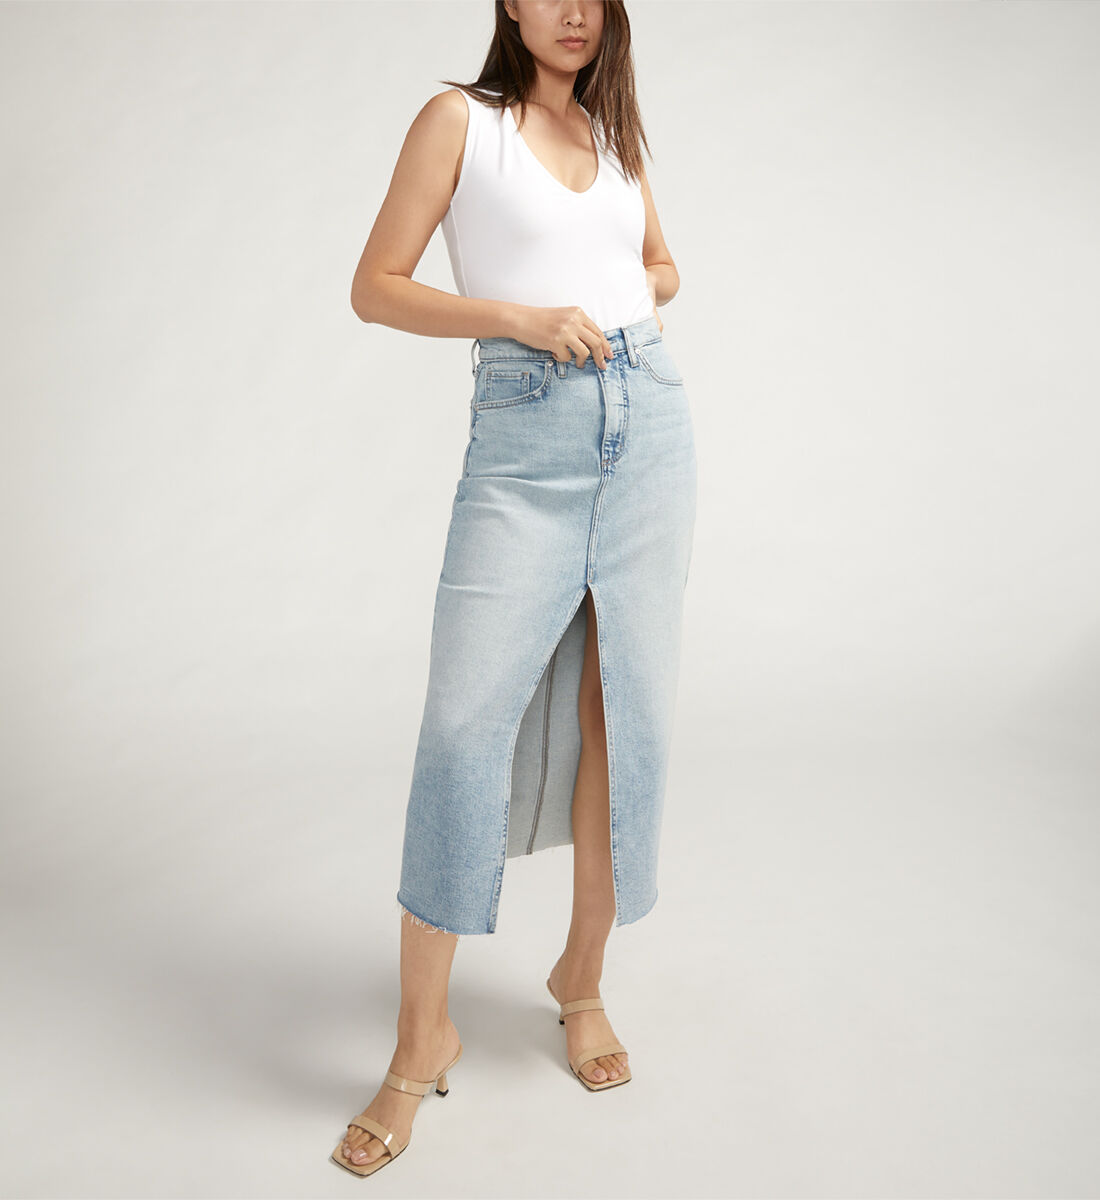 Buy Front-Slit Midi Jean Skirt for CAD 88.00 | Silver Jeans CA New